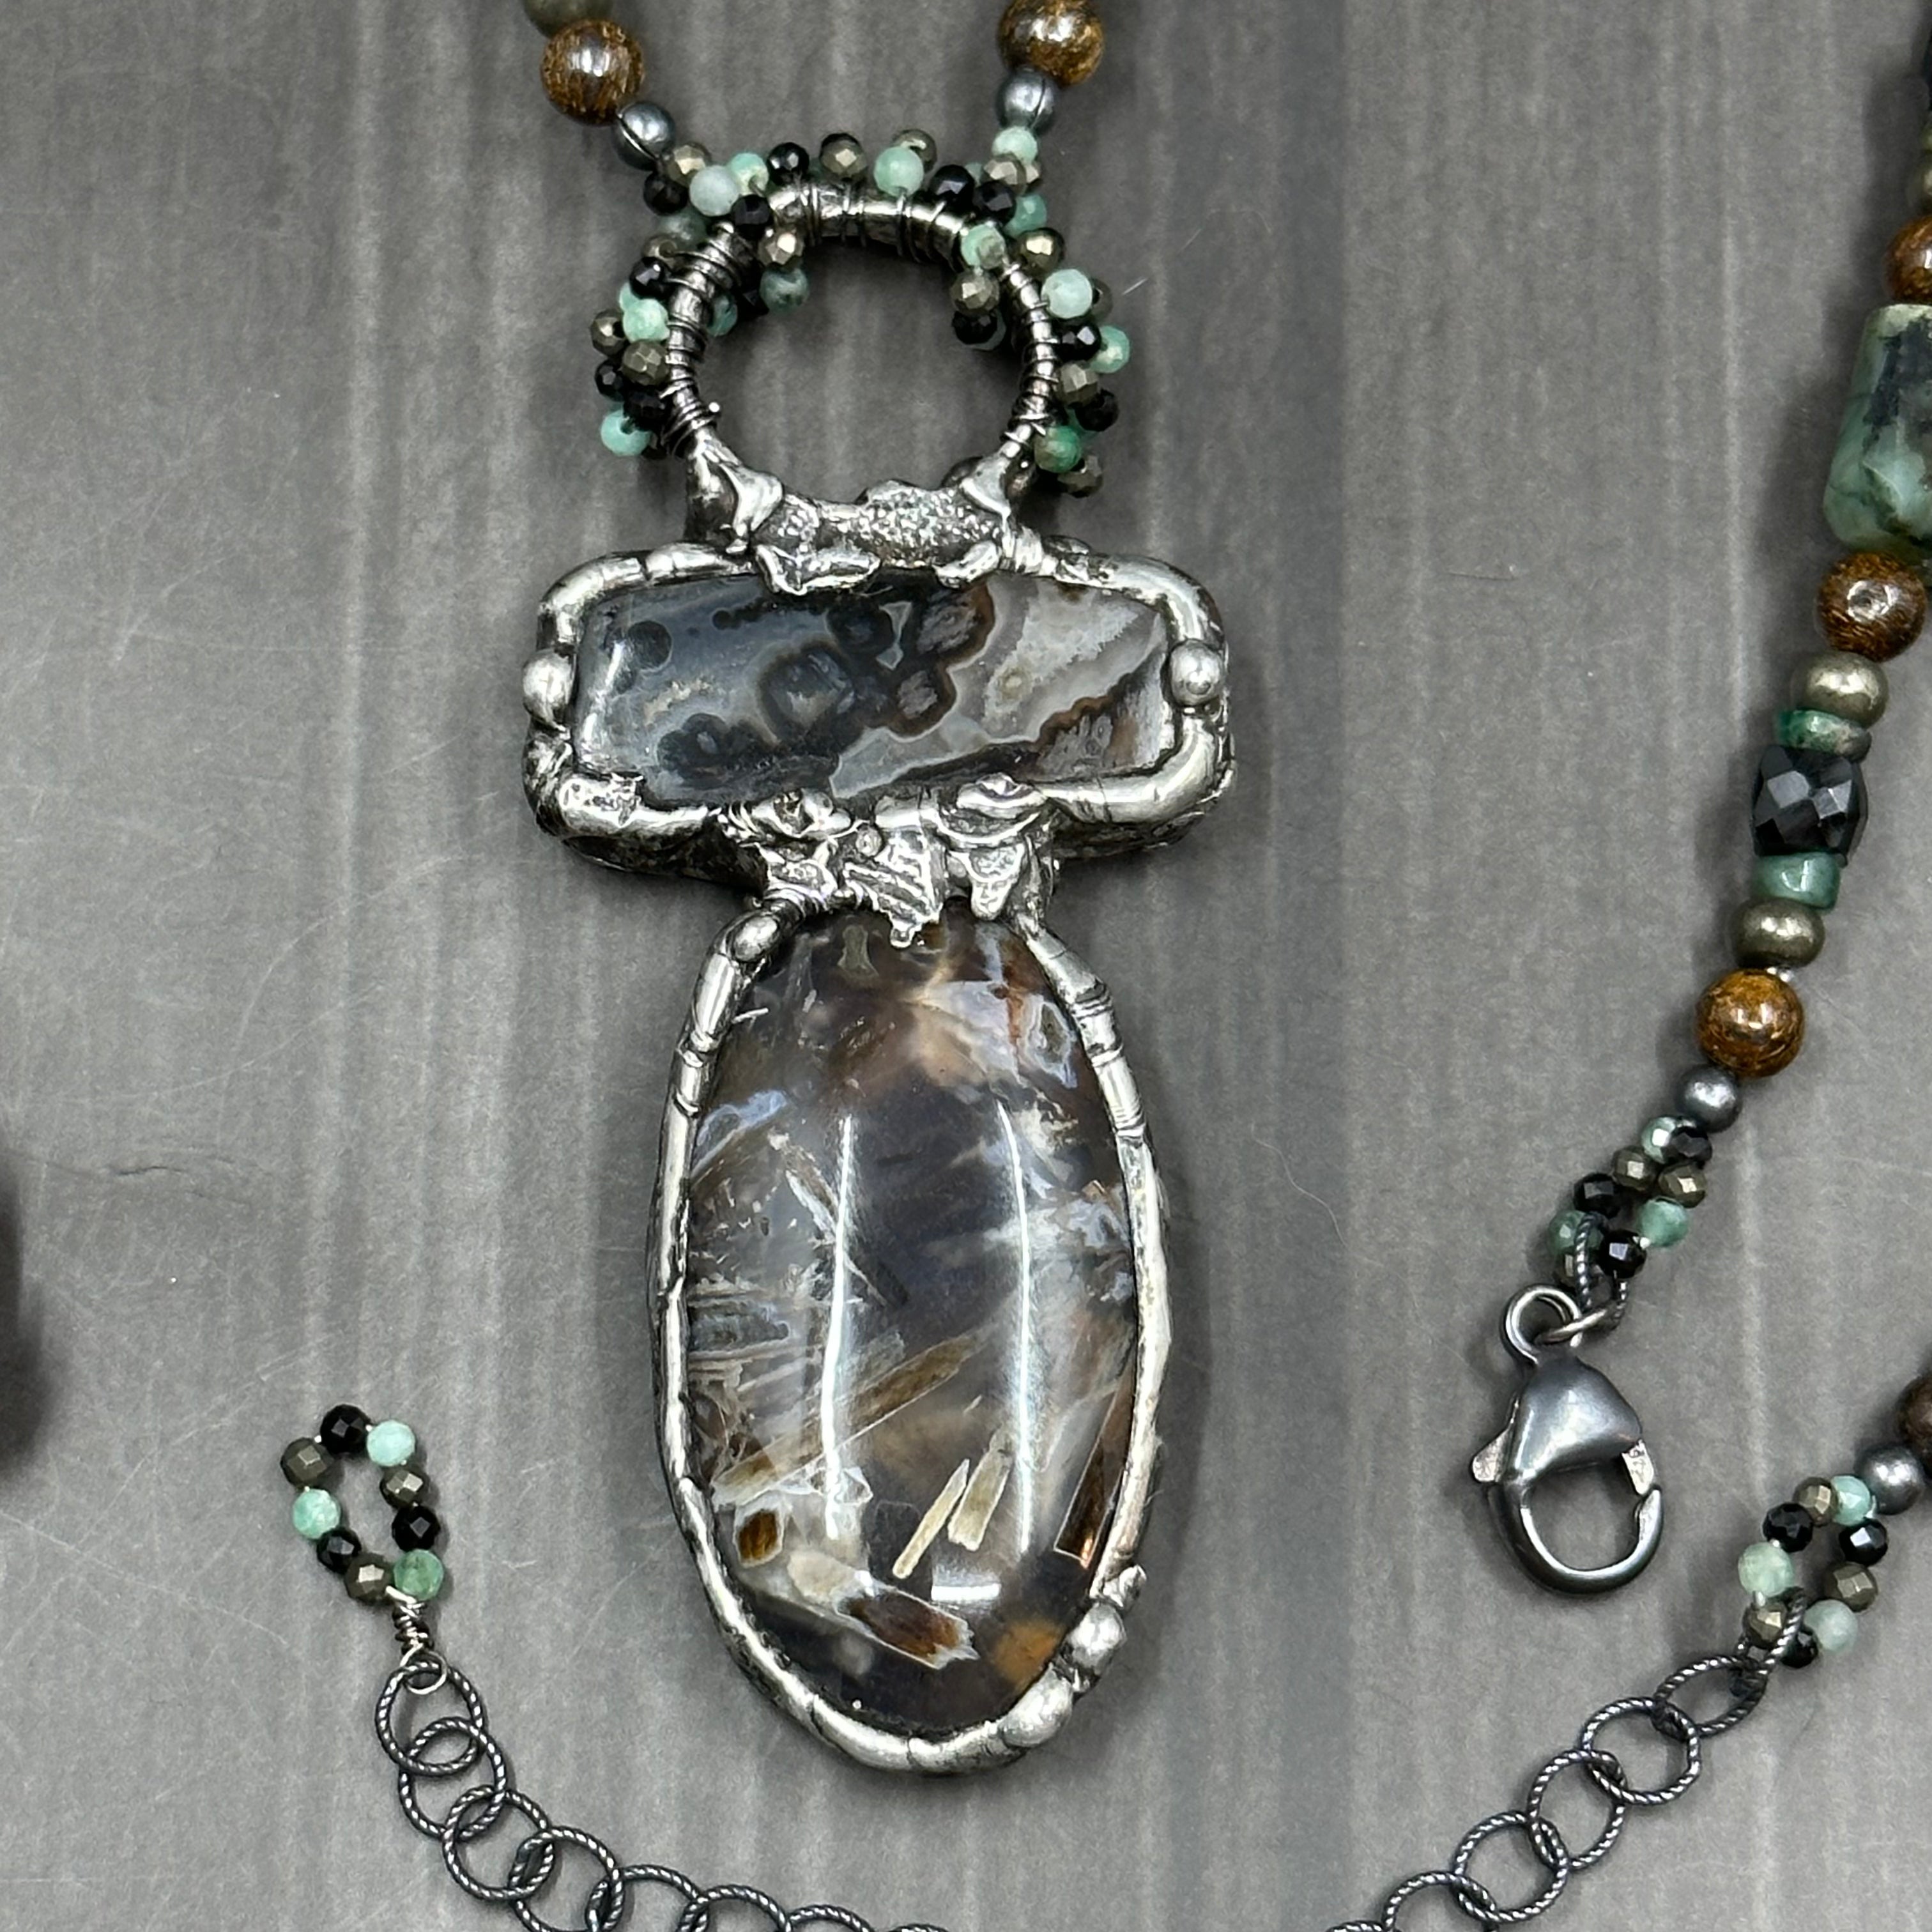 Emerald, Black spinel, Bronzite, and Pyrite Focal Necklace